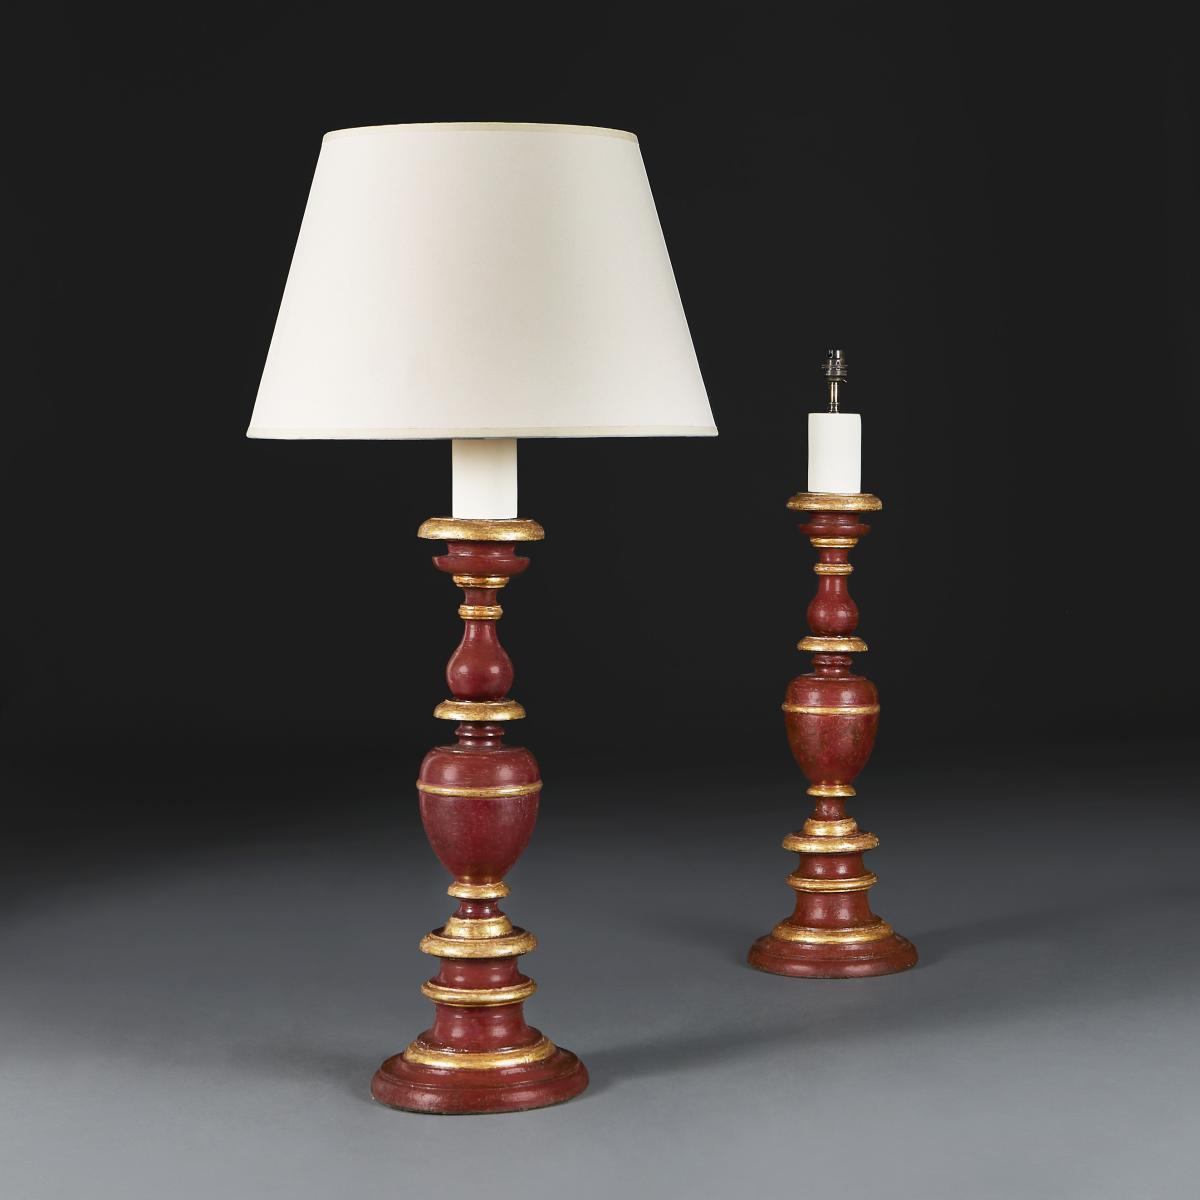 A Pair of Overscale Painted Baluster Candlesticks